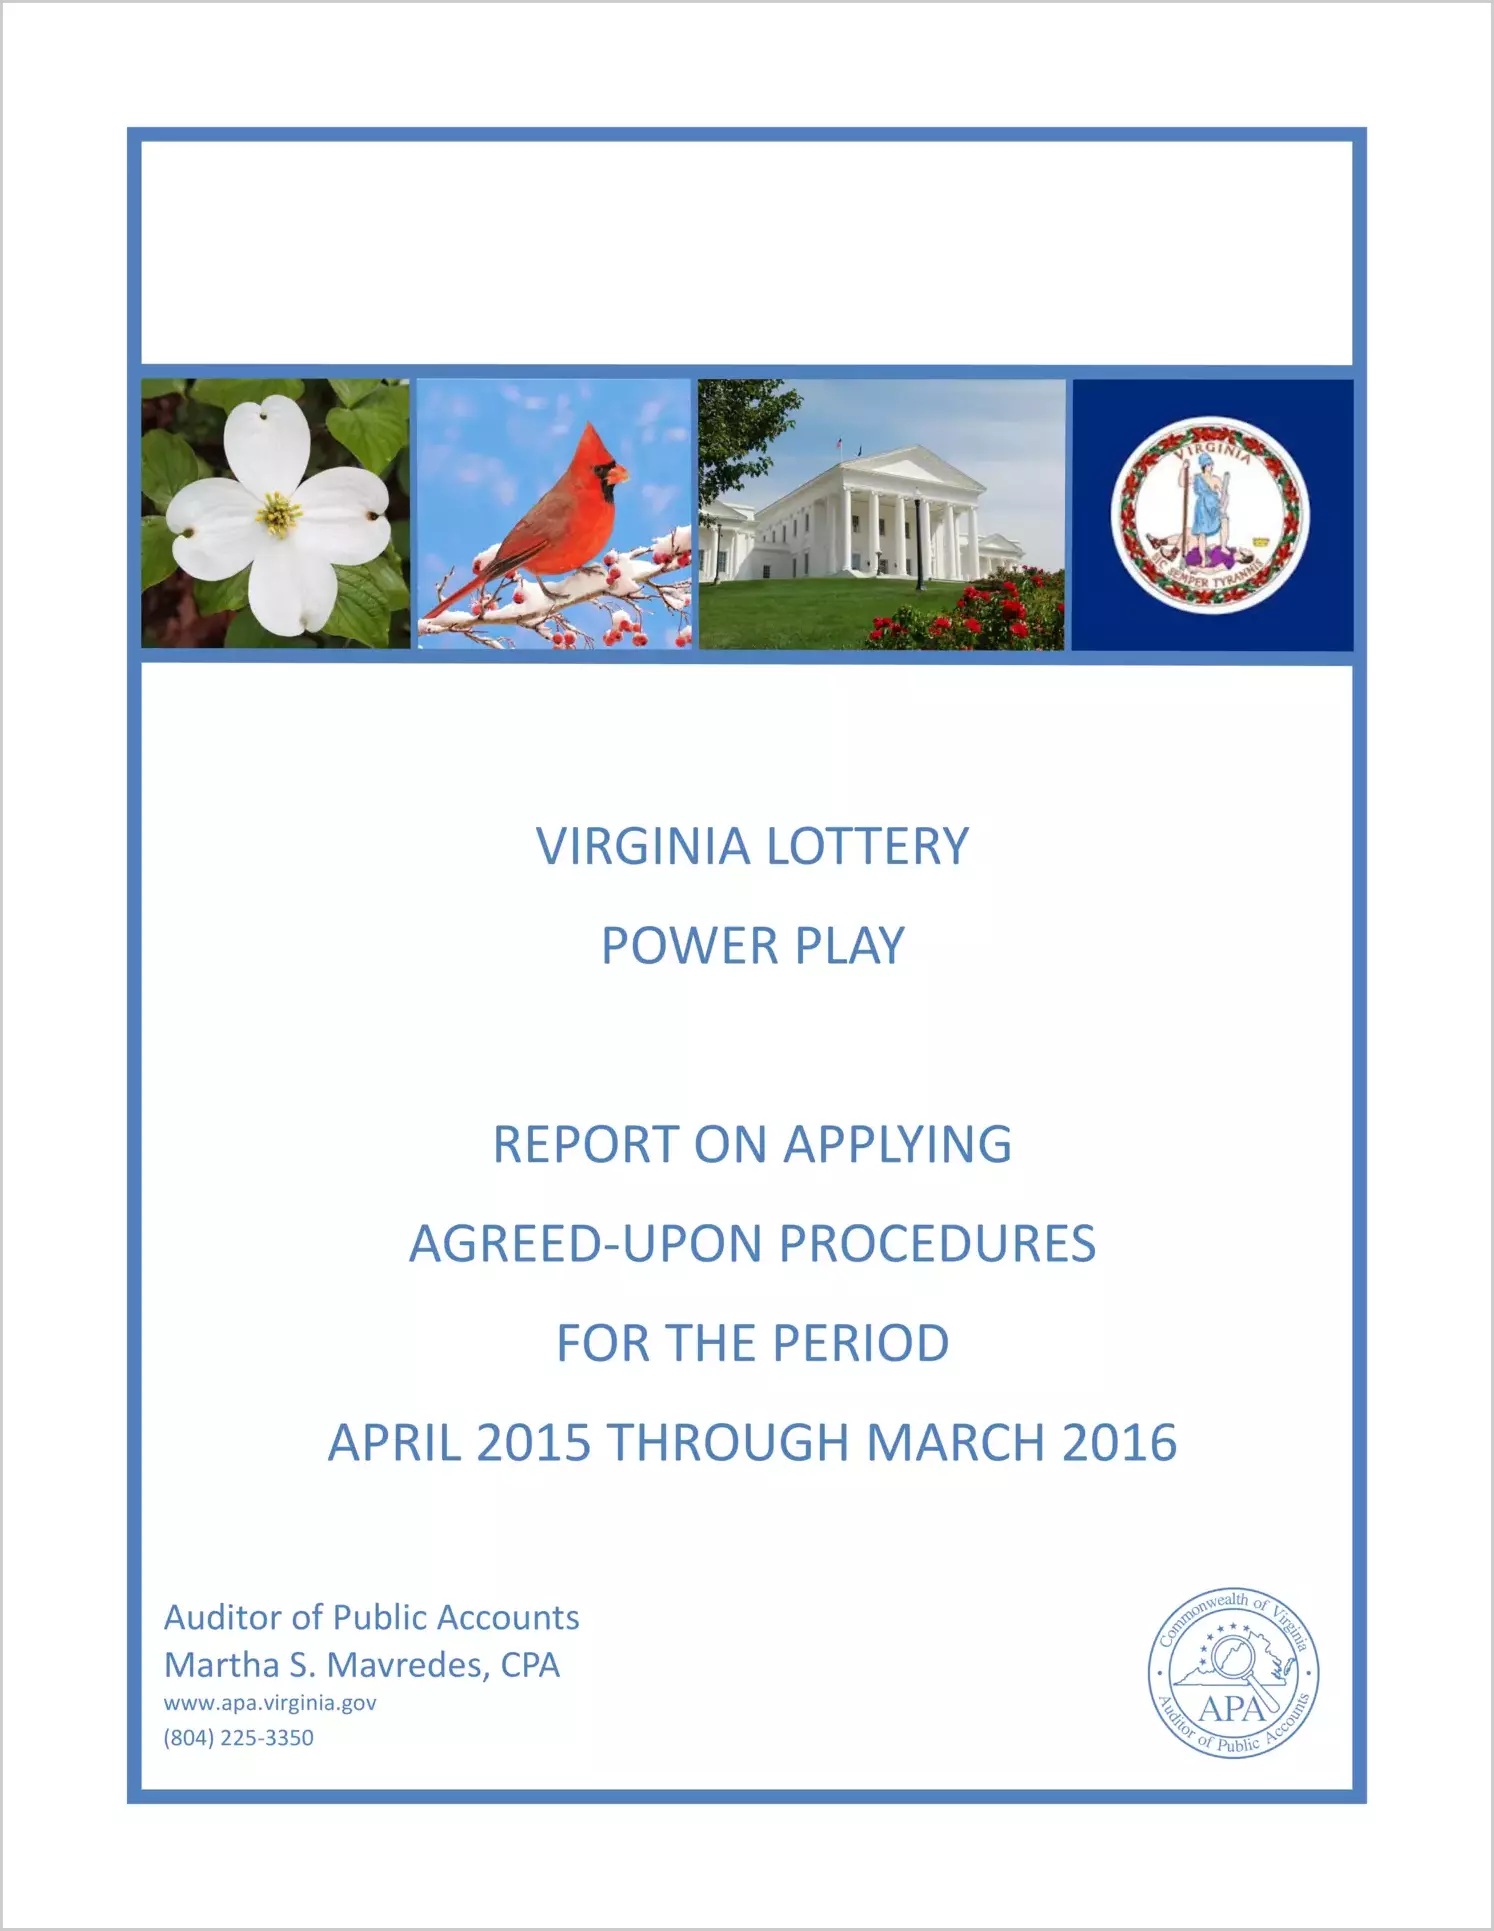 VA Lottery Power Play report on Applying Agreed-Upon Procedures for the period April, 2015 through March, 2016